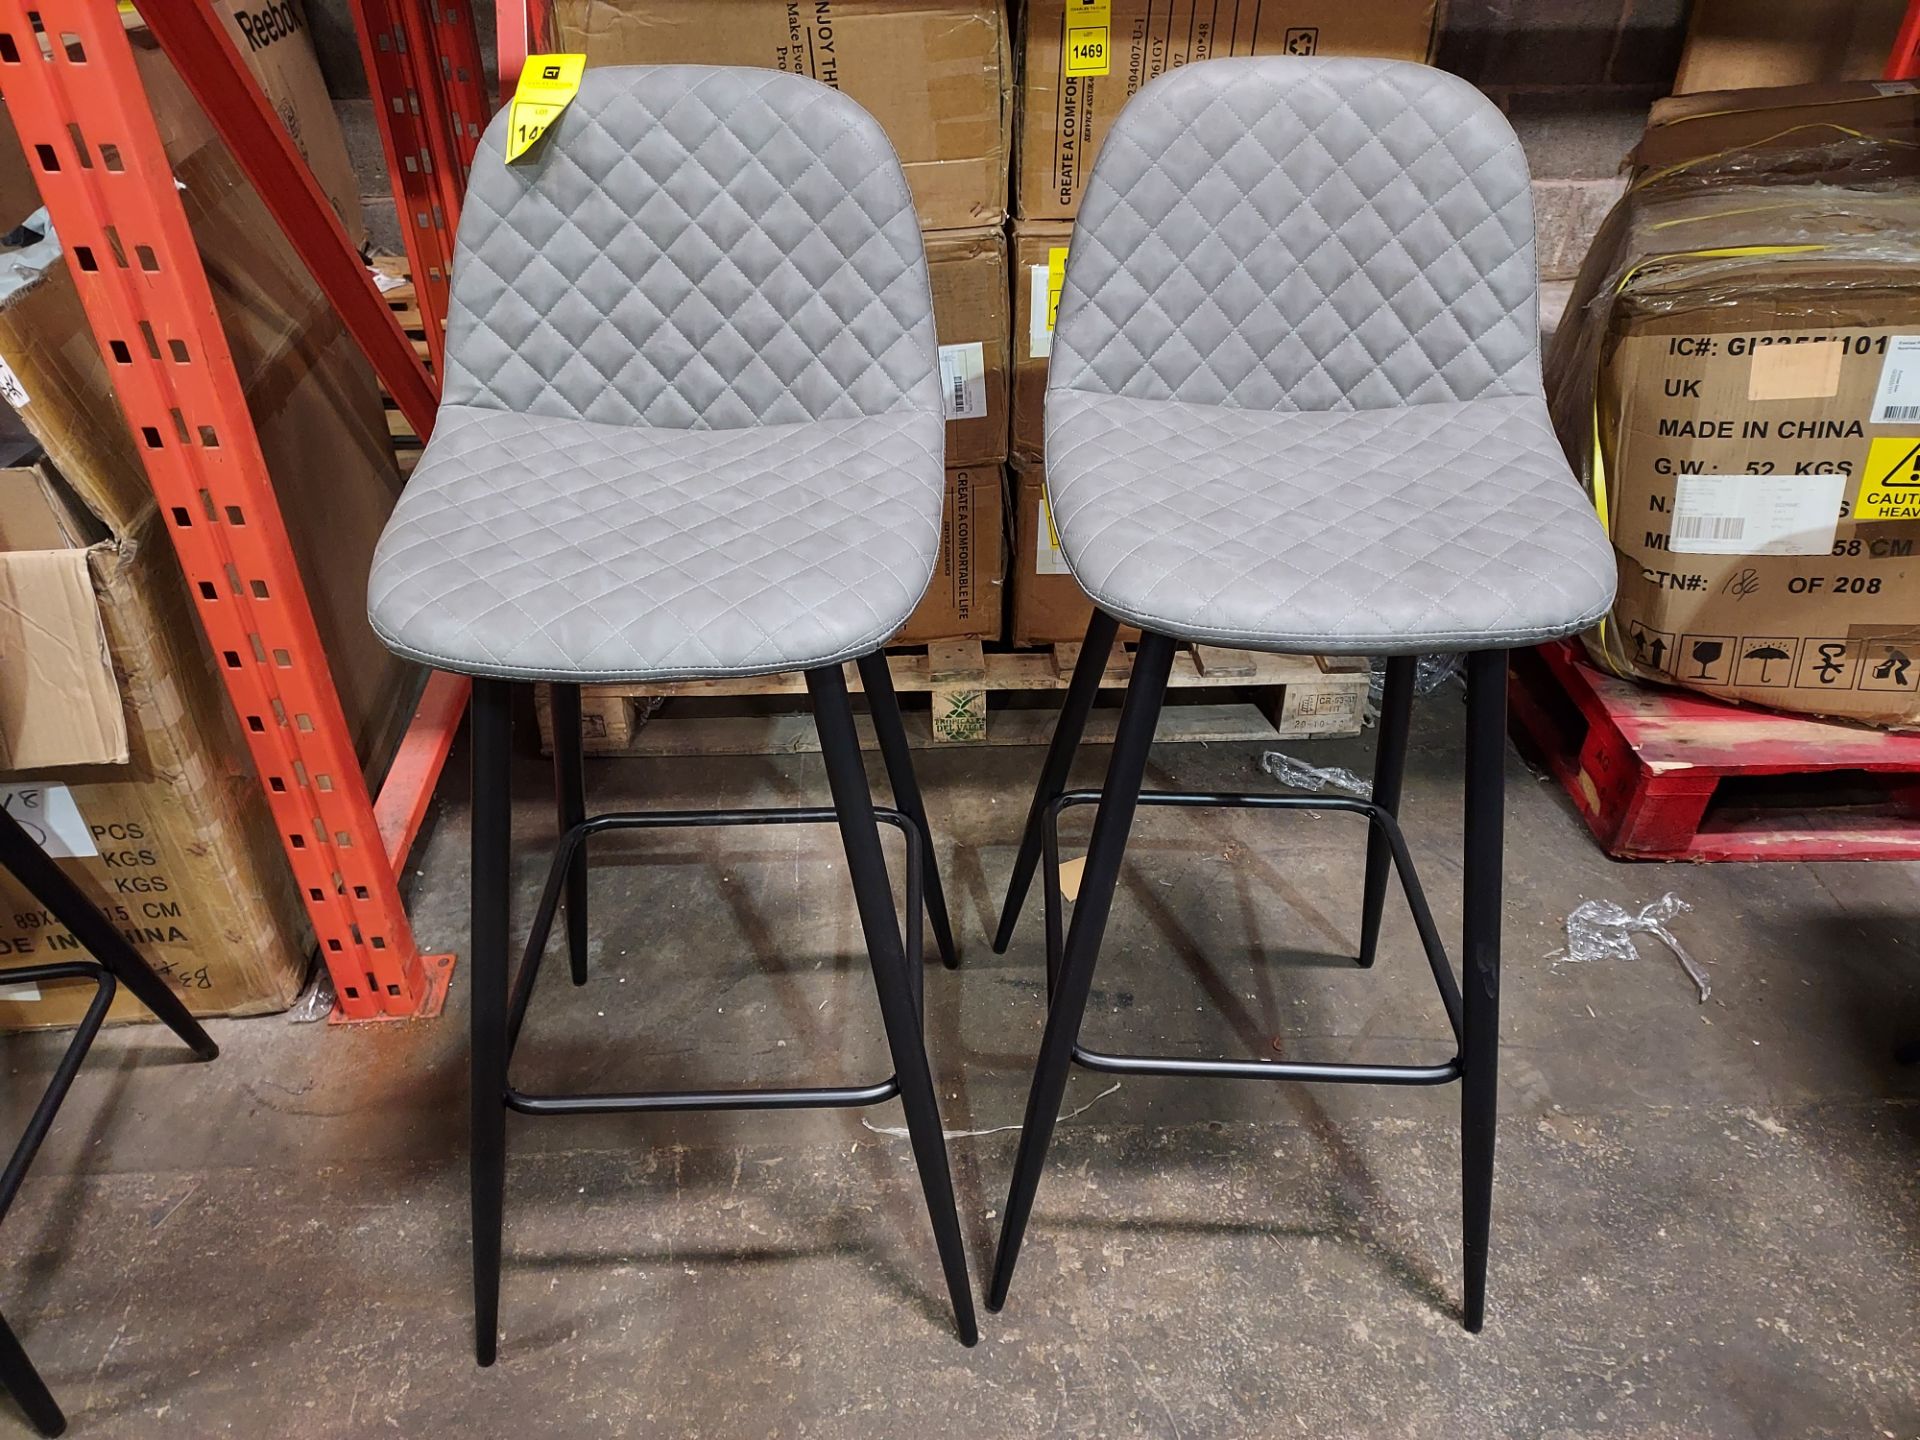 2 X BRAND NEW ENJOY THE GOOD LIFE BAR STOOLS IN LEATHER LOOK GREY - PRE MADE